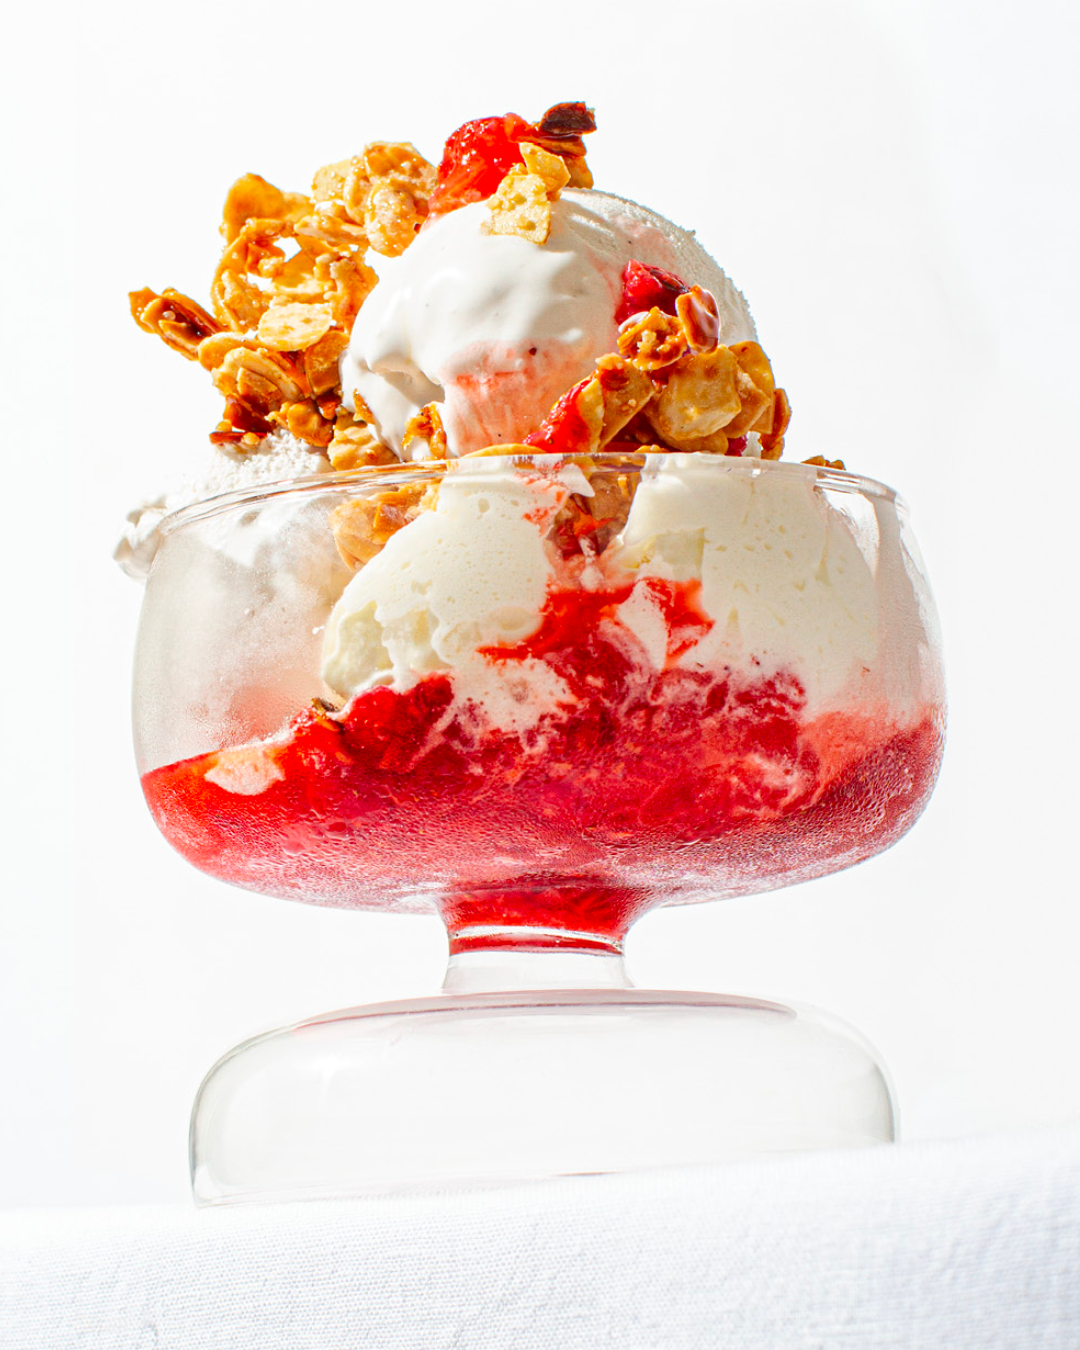 Nootropic Soaked Fruit Sundae With Almond Crunch